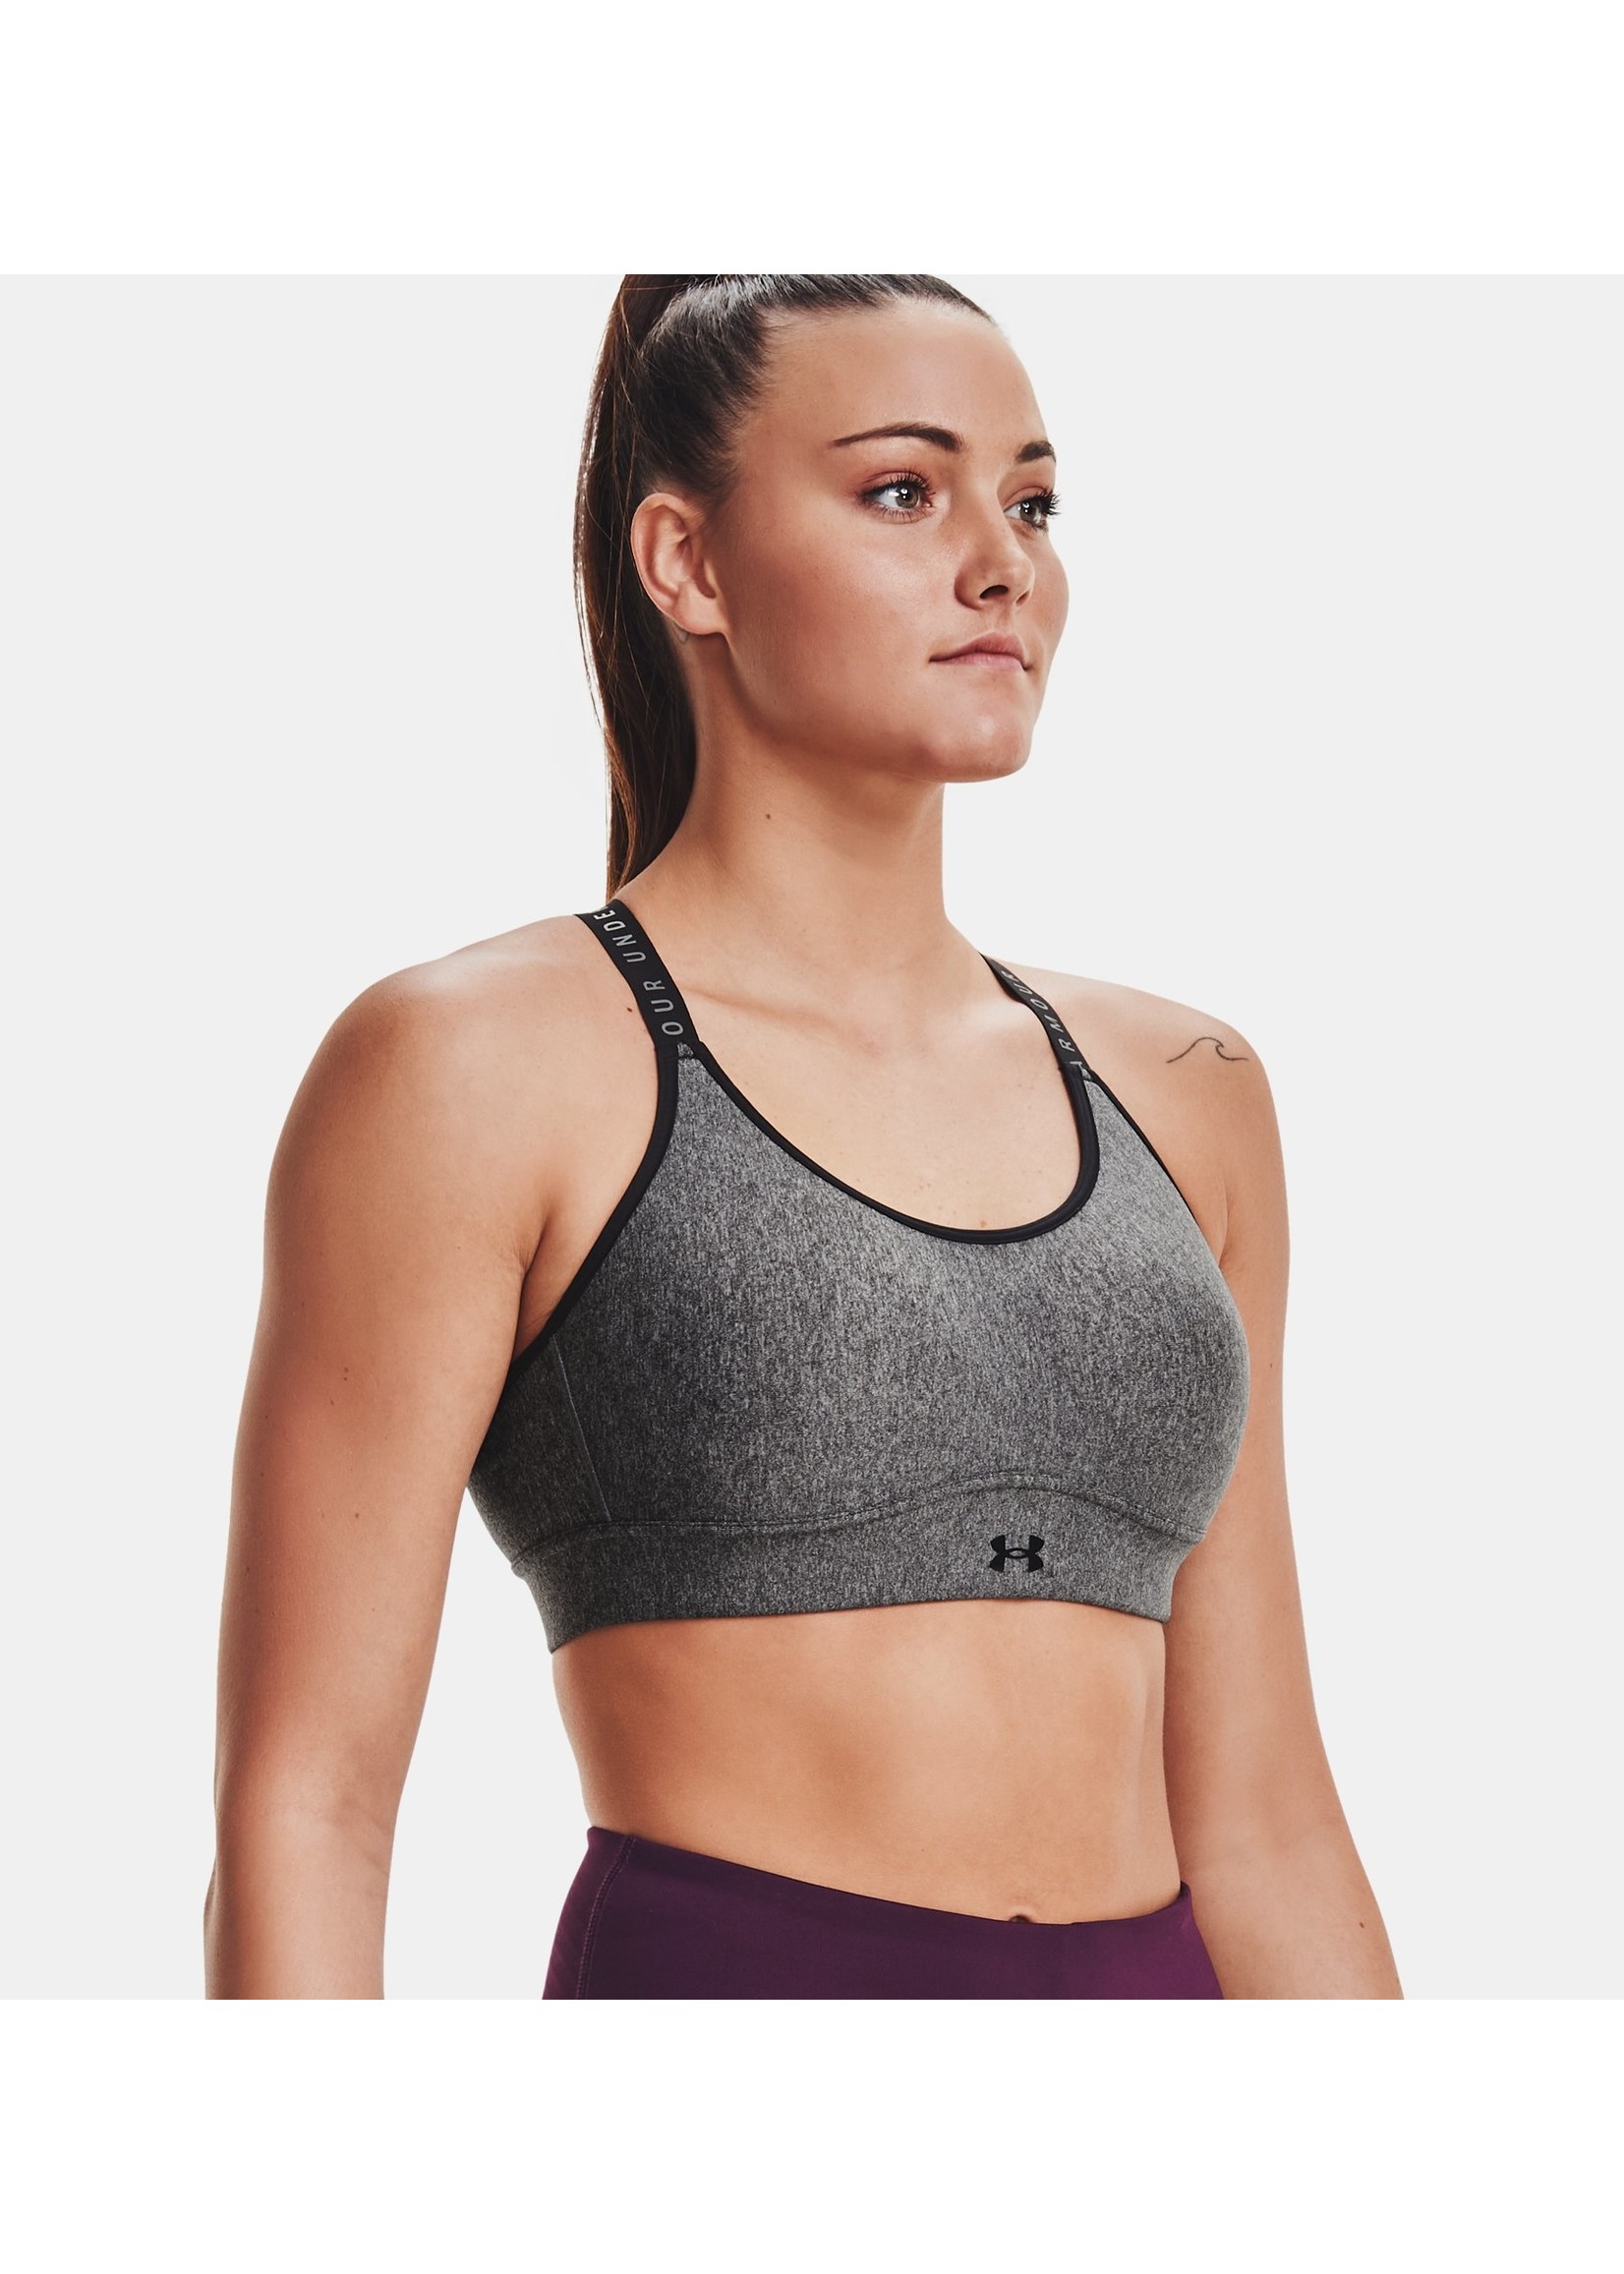 Under Armour - Women's UA Infinity Low Covered Sports Bra